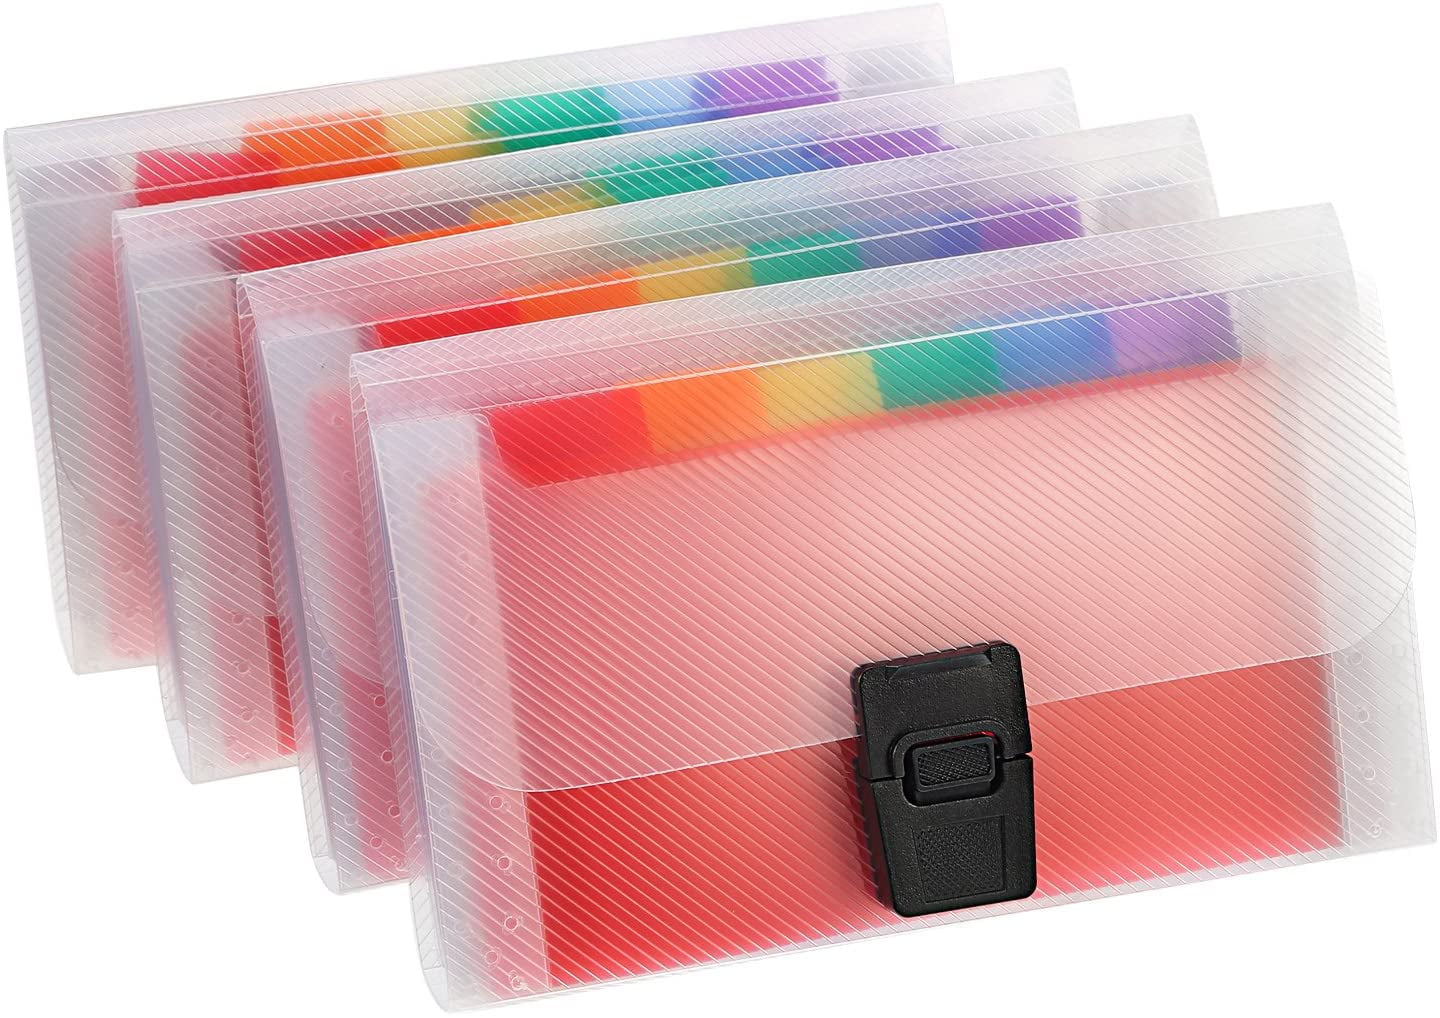 EasyPAG Reusable Dry Erase Sleeves 6 Assorted Colors Clear Protect Bag with Hole 10 x 13 inch,24 Pack 